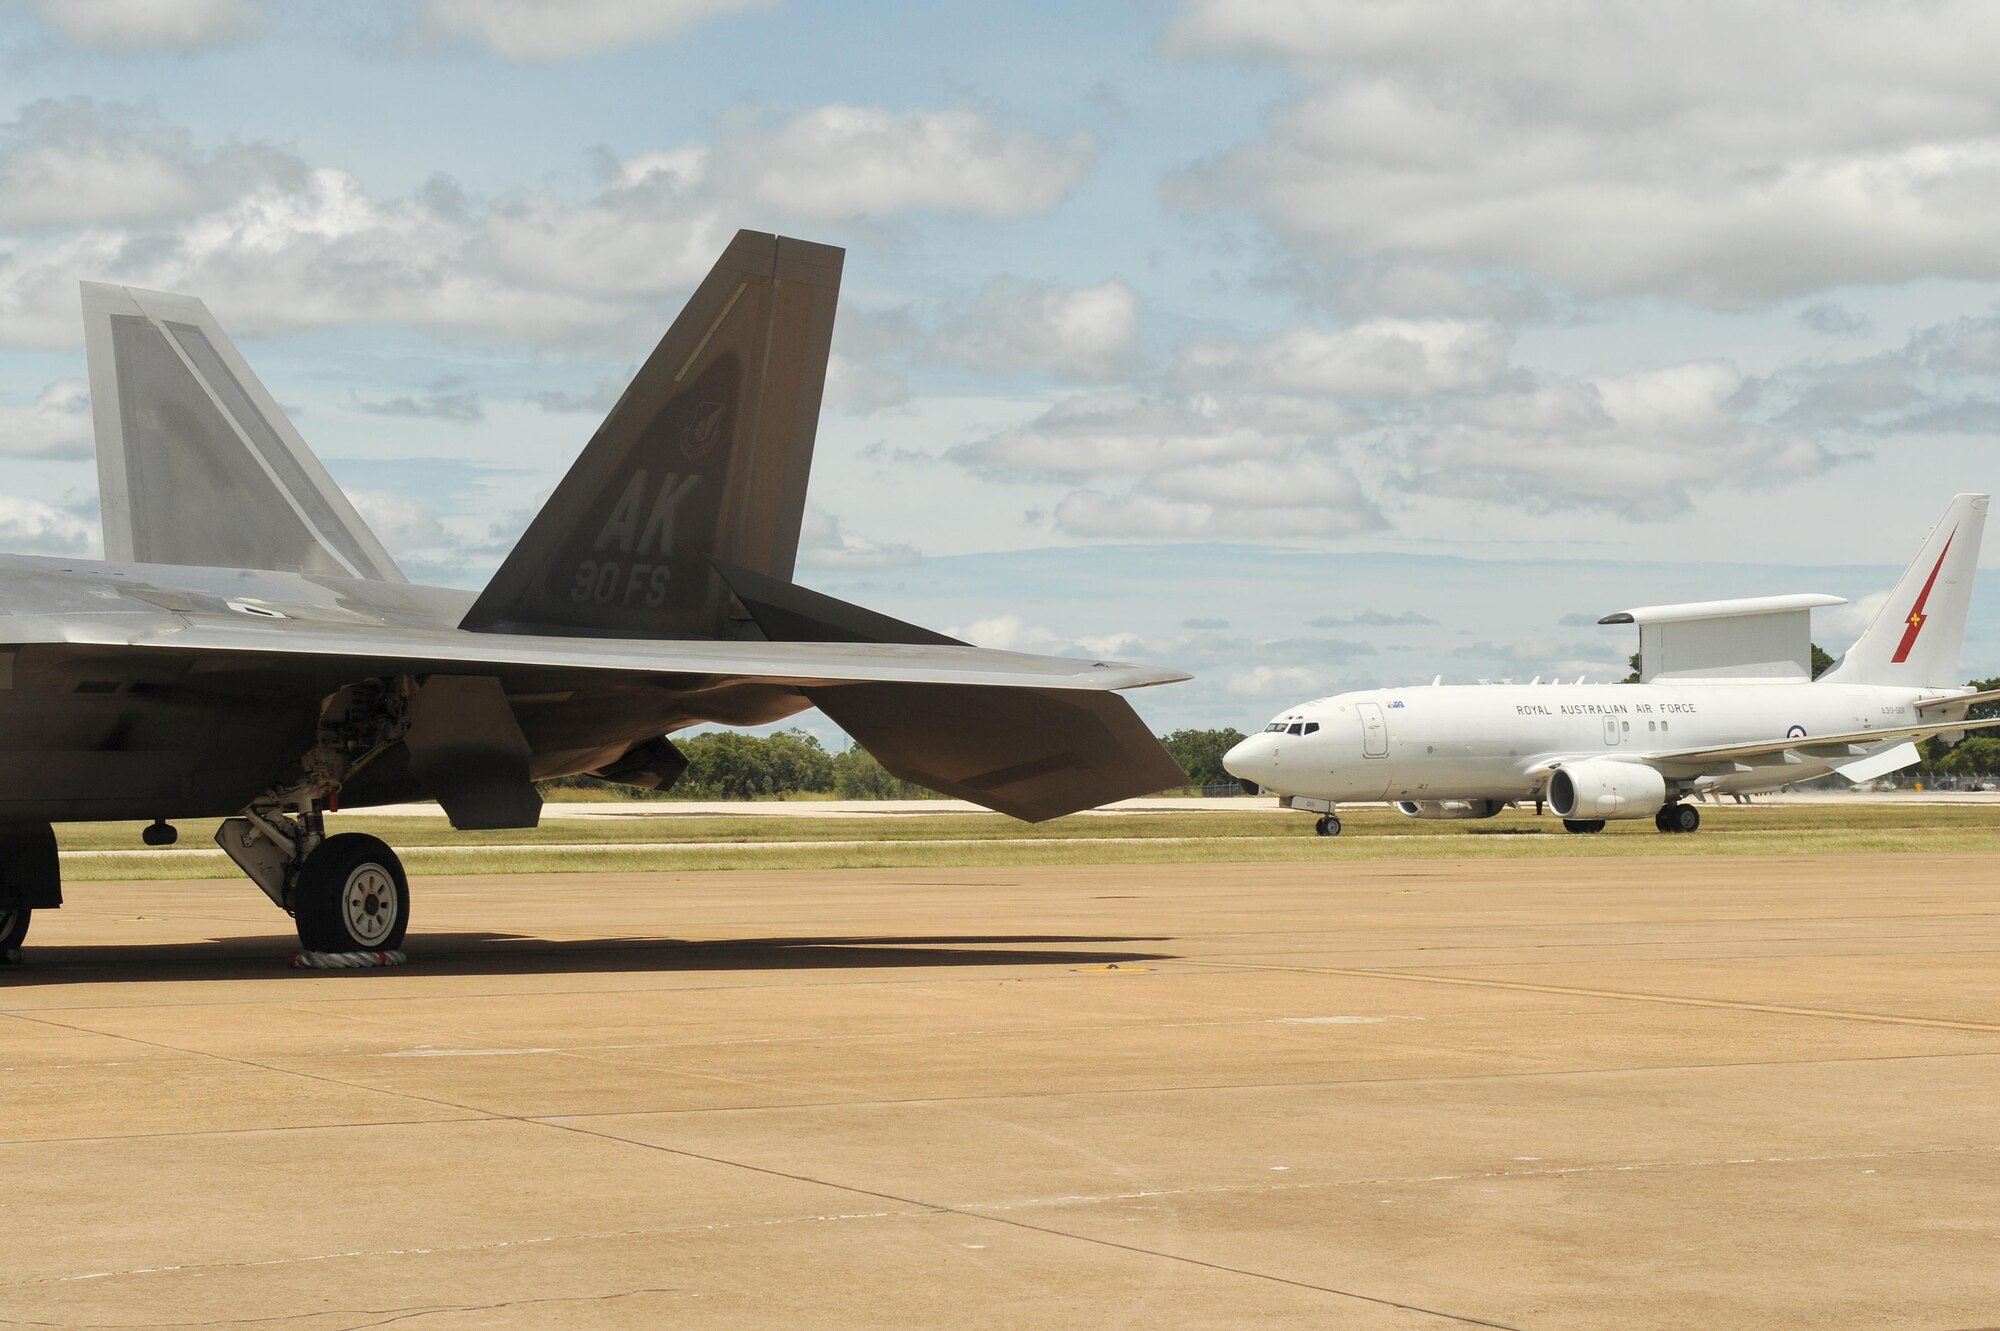 A Royal Australian Air Force E-7A Wedgetail taxies past a U.S. Air Force 90th Fighter Squadron F-22 Raptor at RAAF Base Tindal, Australia, Feb. 24, 2017. Twelve F-22 Raptors and approximately 200 U.S. Air Force Airmen are in Australia as part of the Enhanced Air Cooperation, an initiative under the Force Posture Agreement between the U.S. and Australia. (U.S. Air Force photo by Staff Sgt. Alexander Martinez)